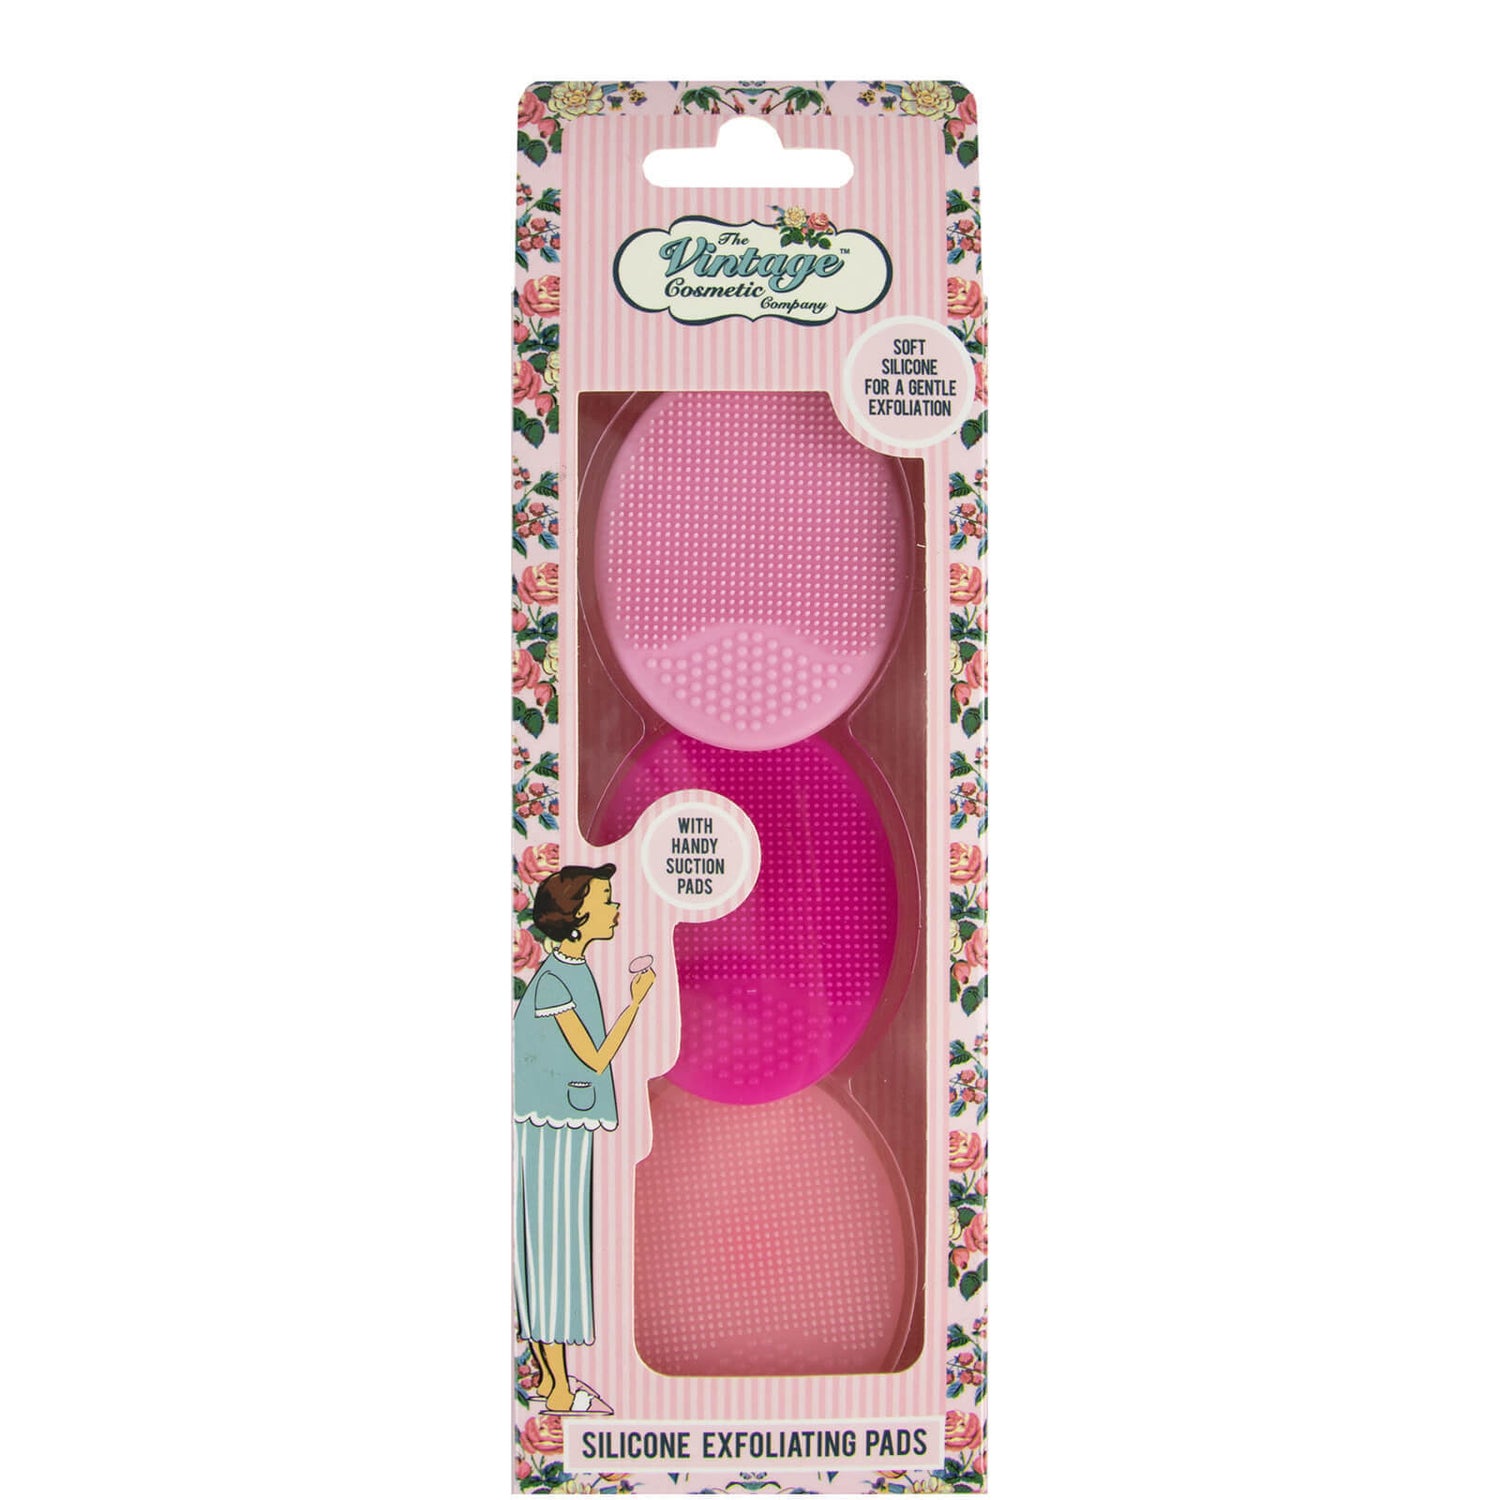 The Vintage Cosmetic Company Silicone Exfoliating Pads